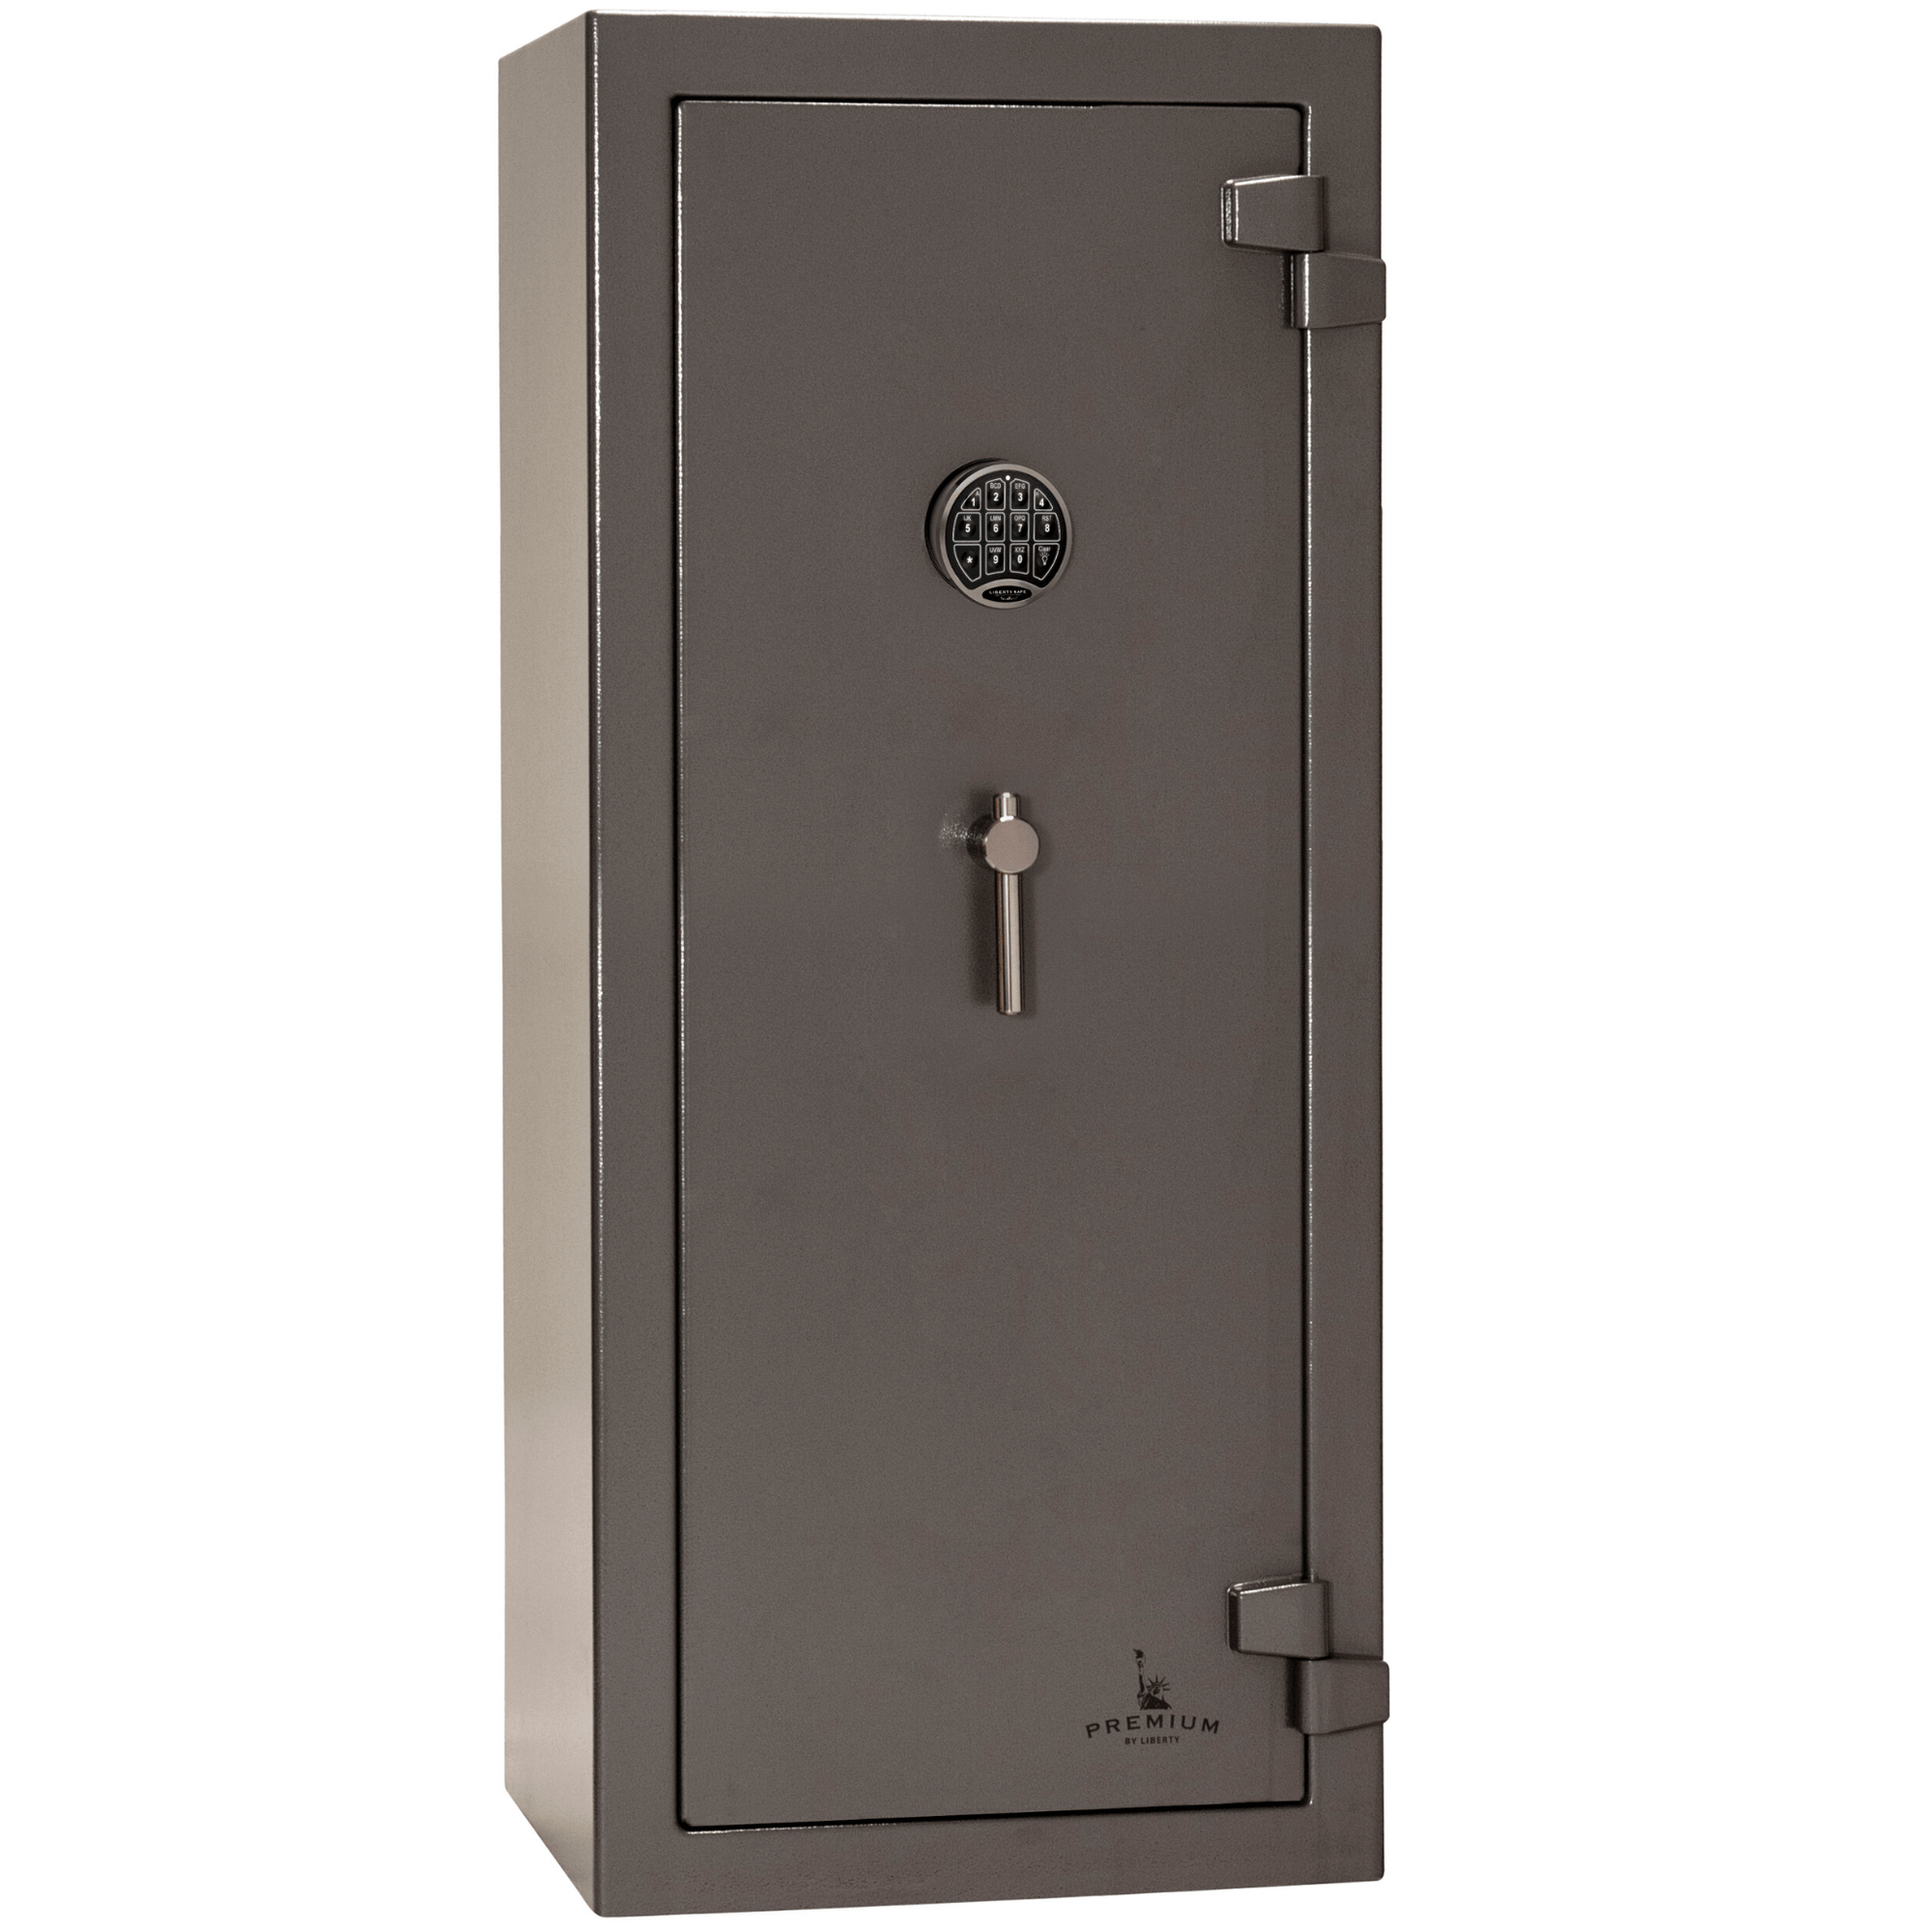 Premium Home | 17 | 90 Minute Fire Protection | Gray | Electronic Lock | Dimensions: 59"(H) x 24"(W) x 22.5"(D)